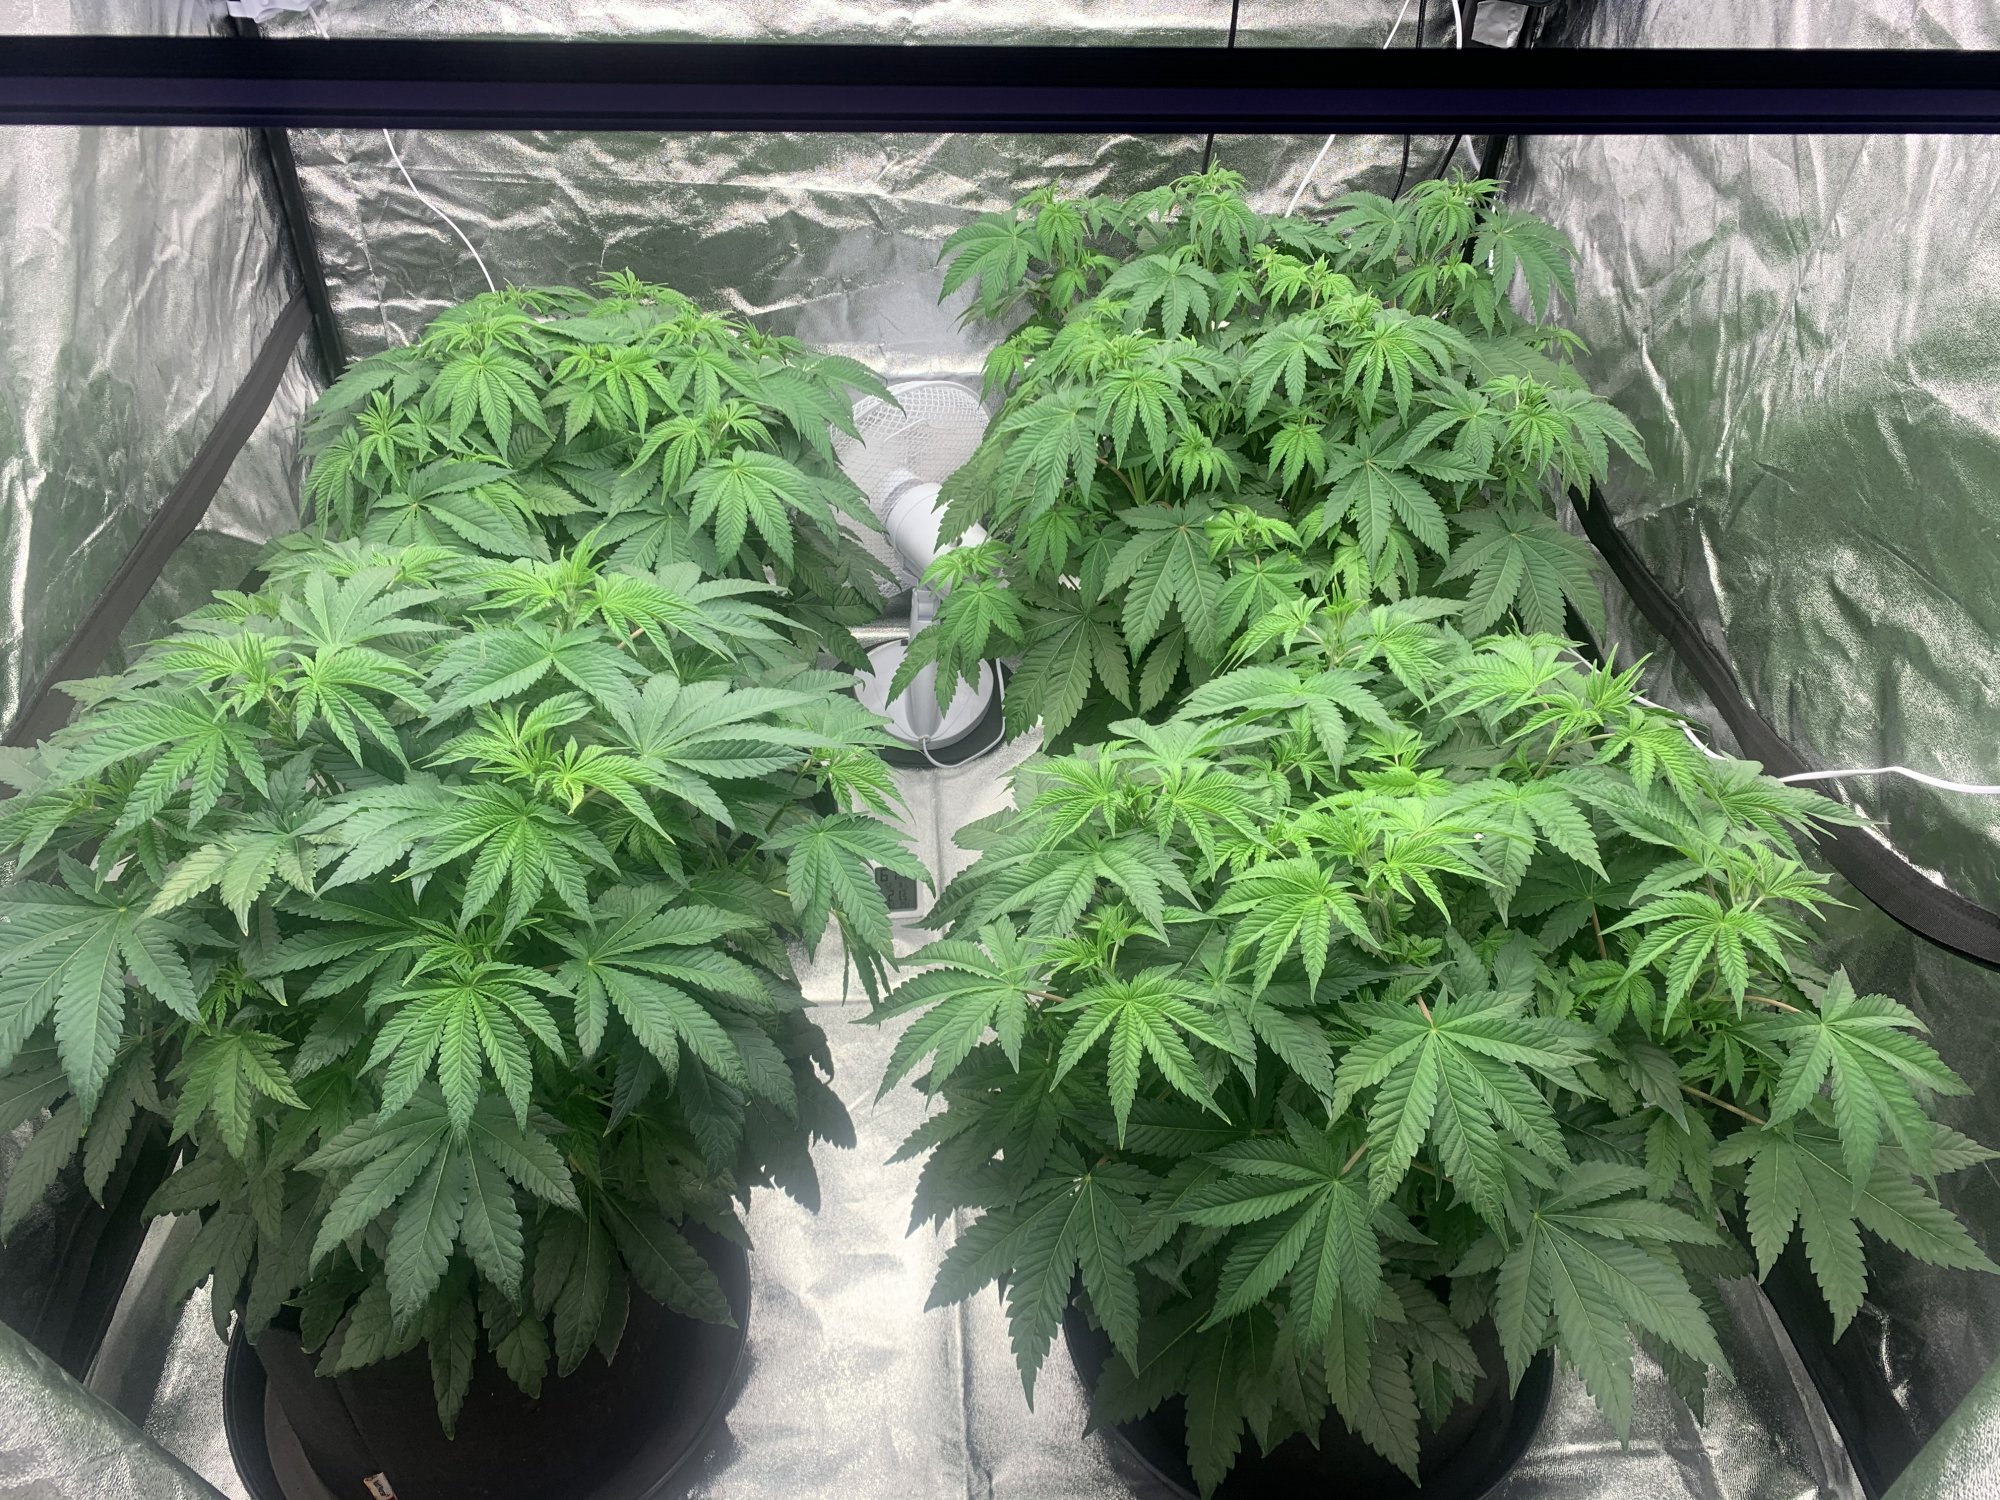 Help with light and nutrients 5